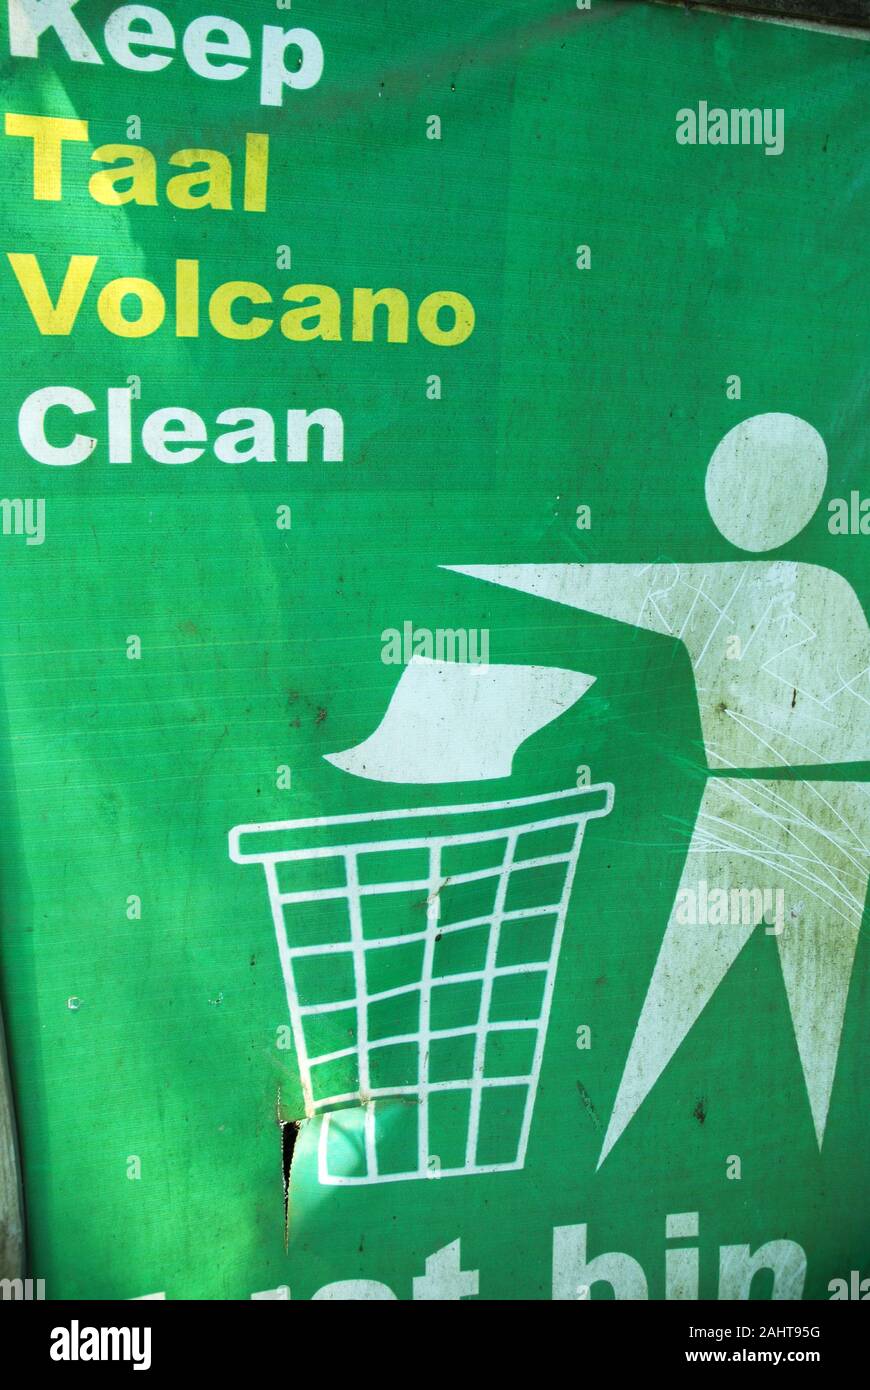 Keep Taal Volcano Clean Sign, Taal Volcano, Talisay, Batangas Province, Philippines. Stock Photo